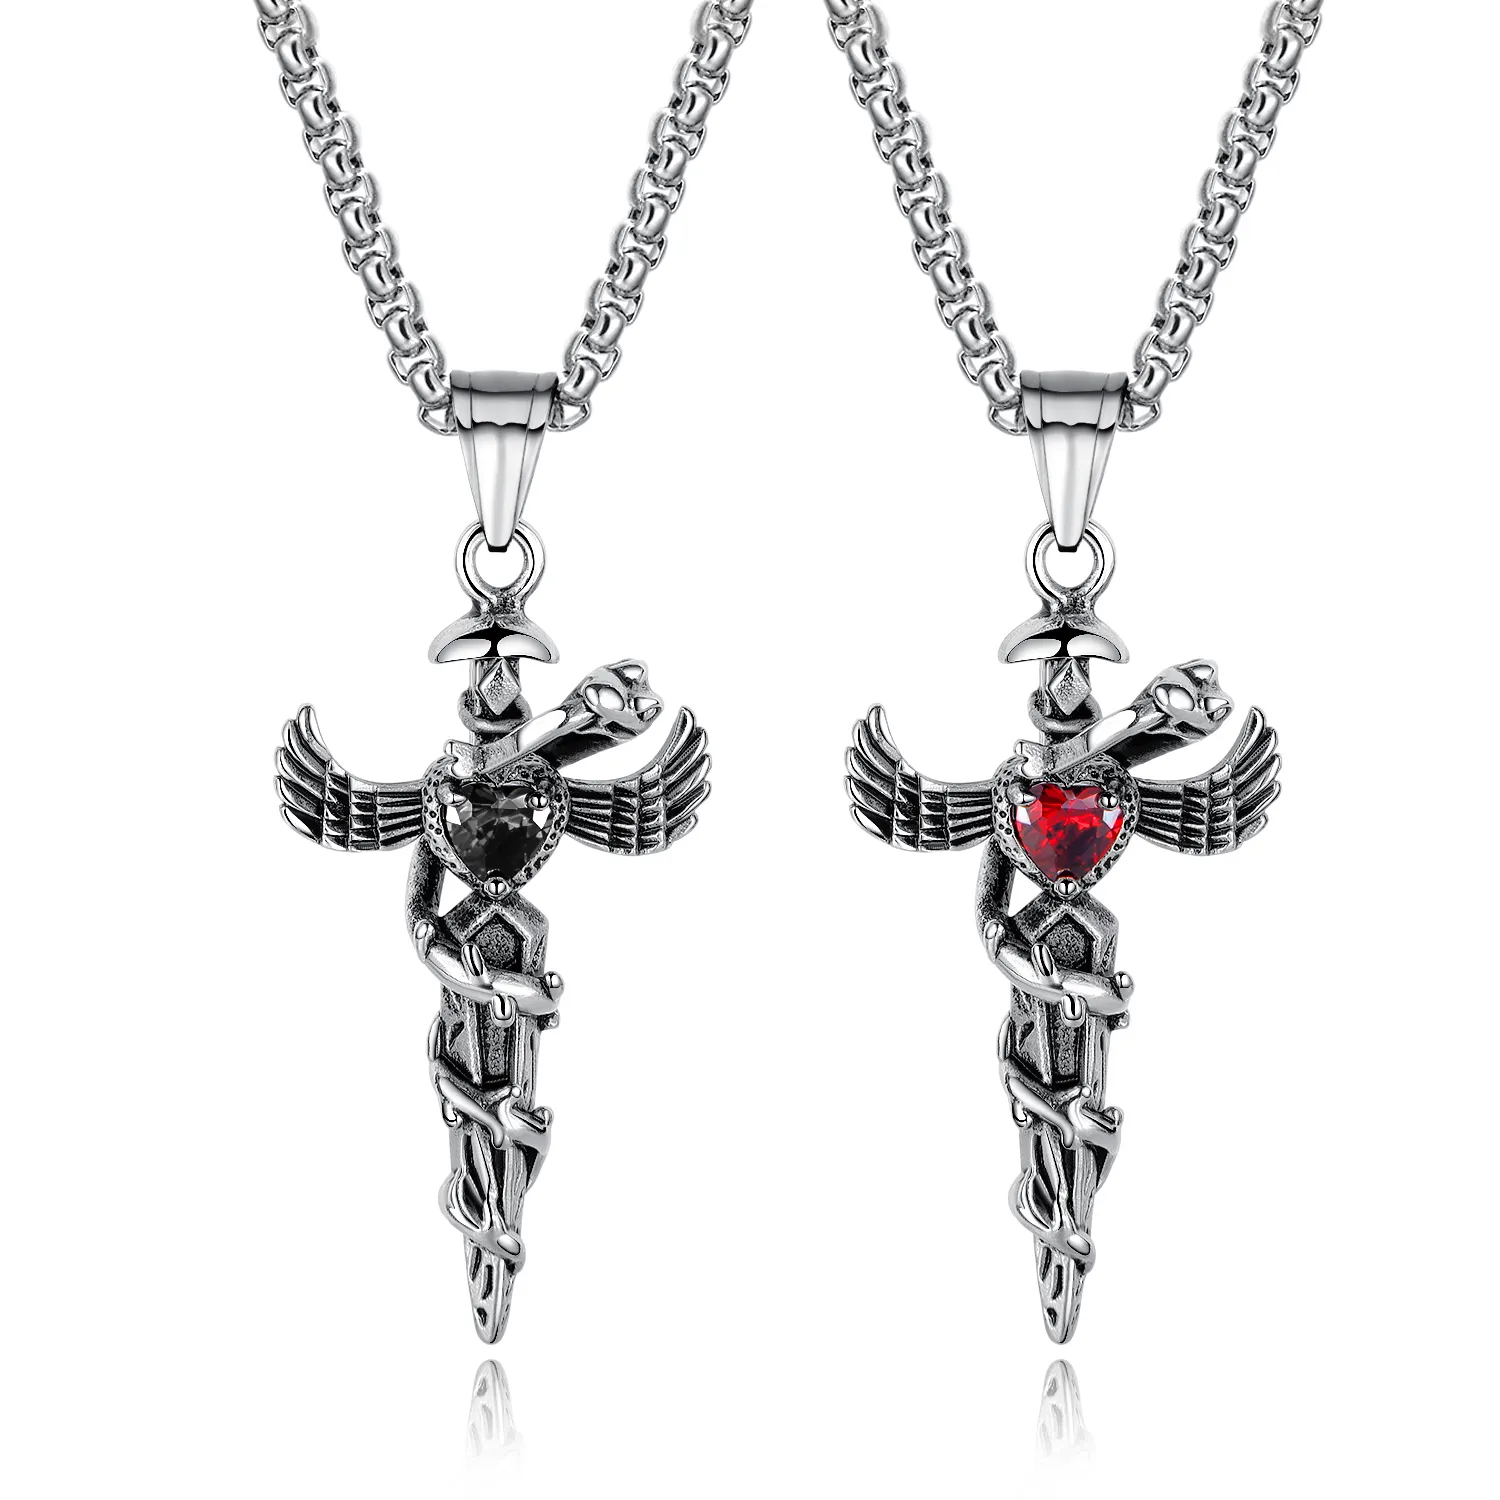 Long Cross Snake Fashion Gothic Retro Men's Stainless Steel Necklace Pendant